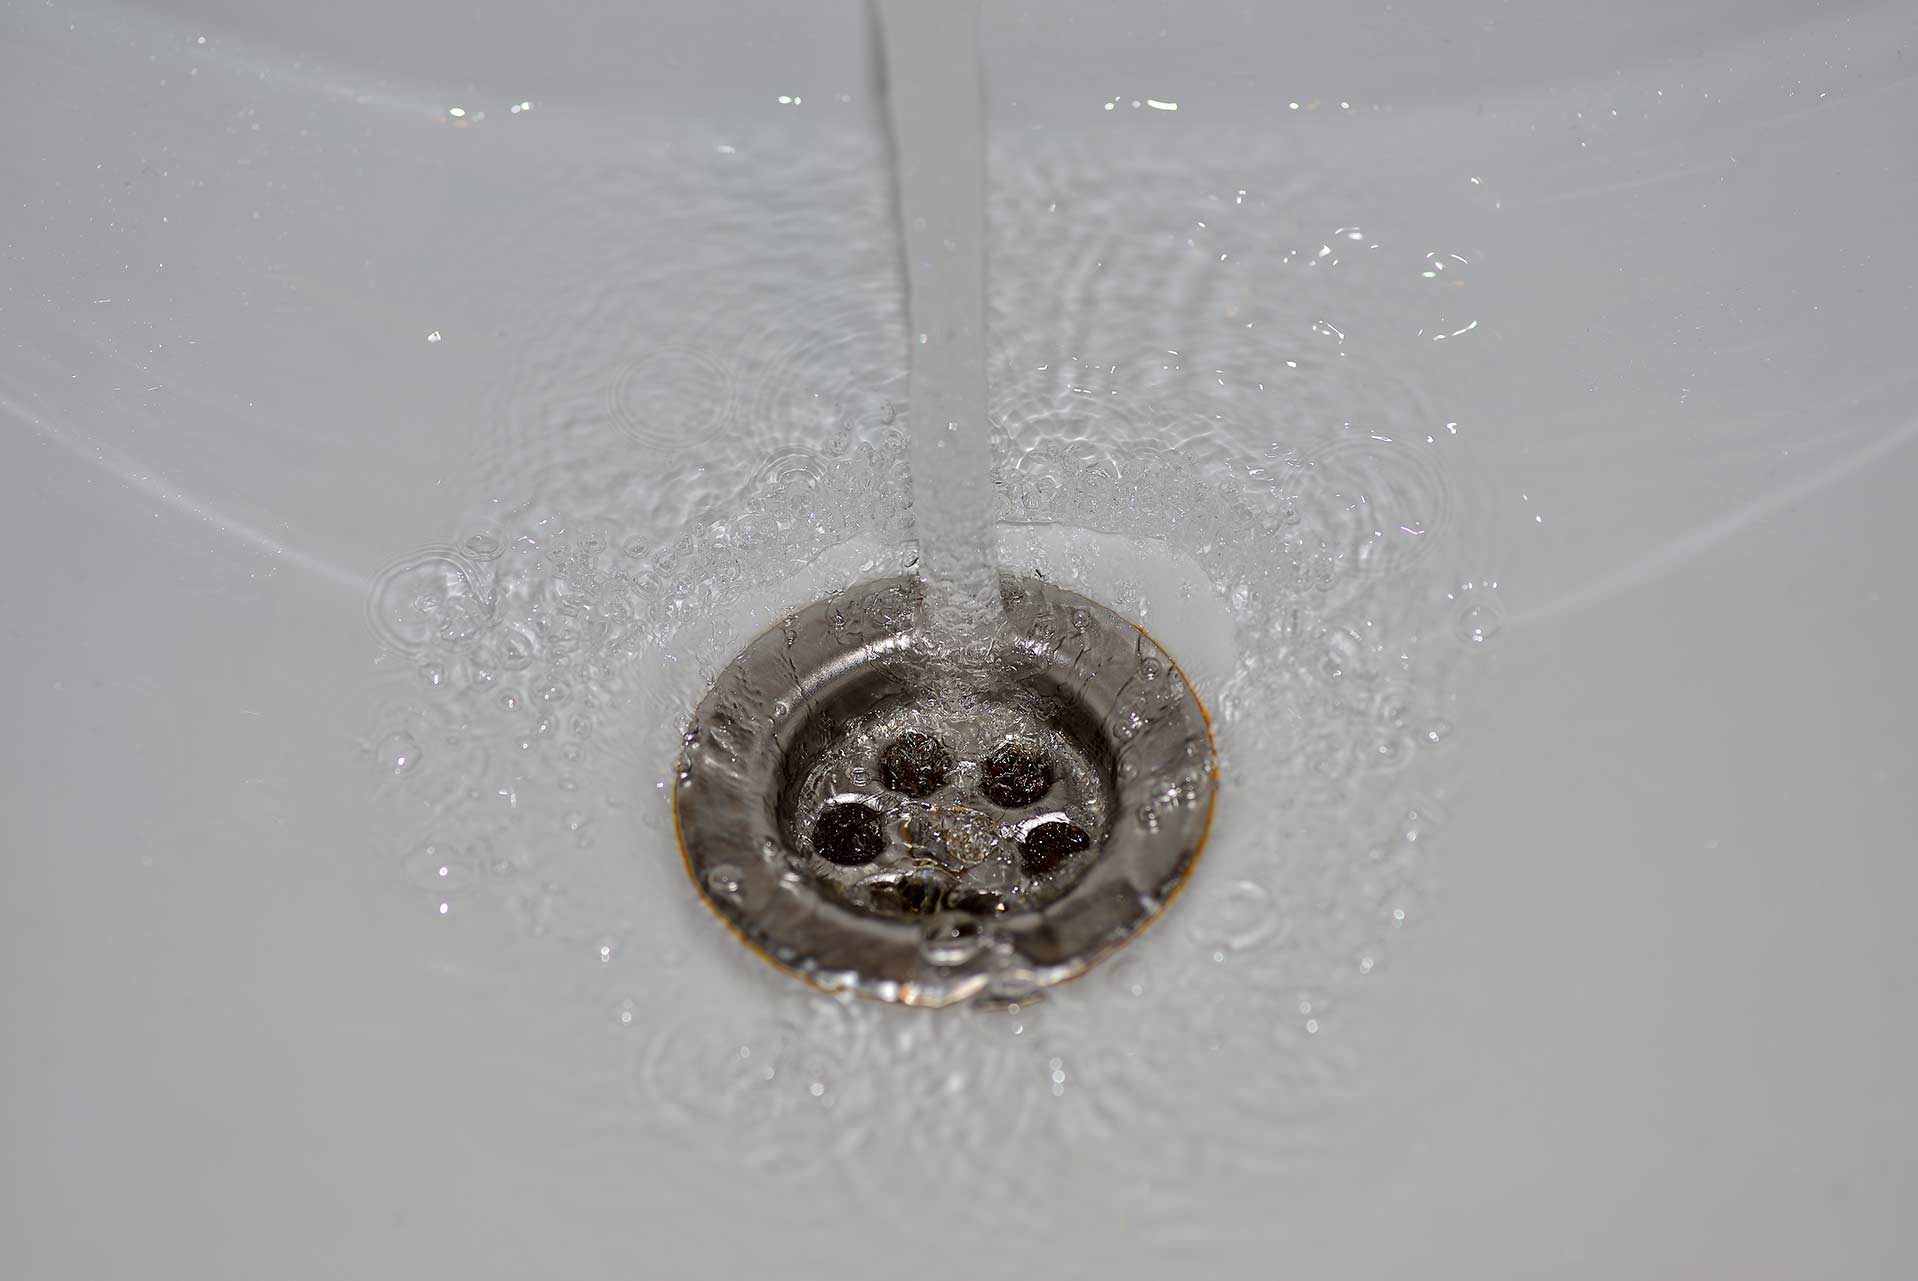 A2B Drains provides services to unblock blocked sinks and drains for properties in North London.